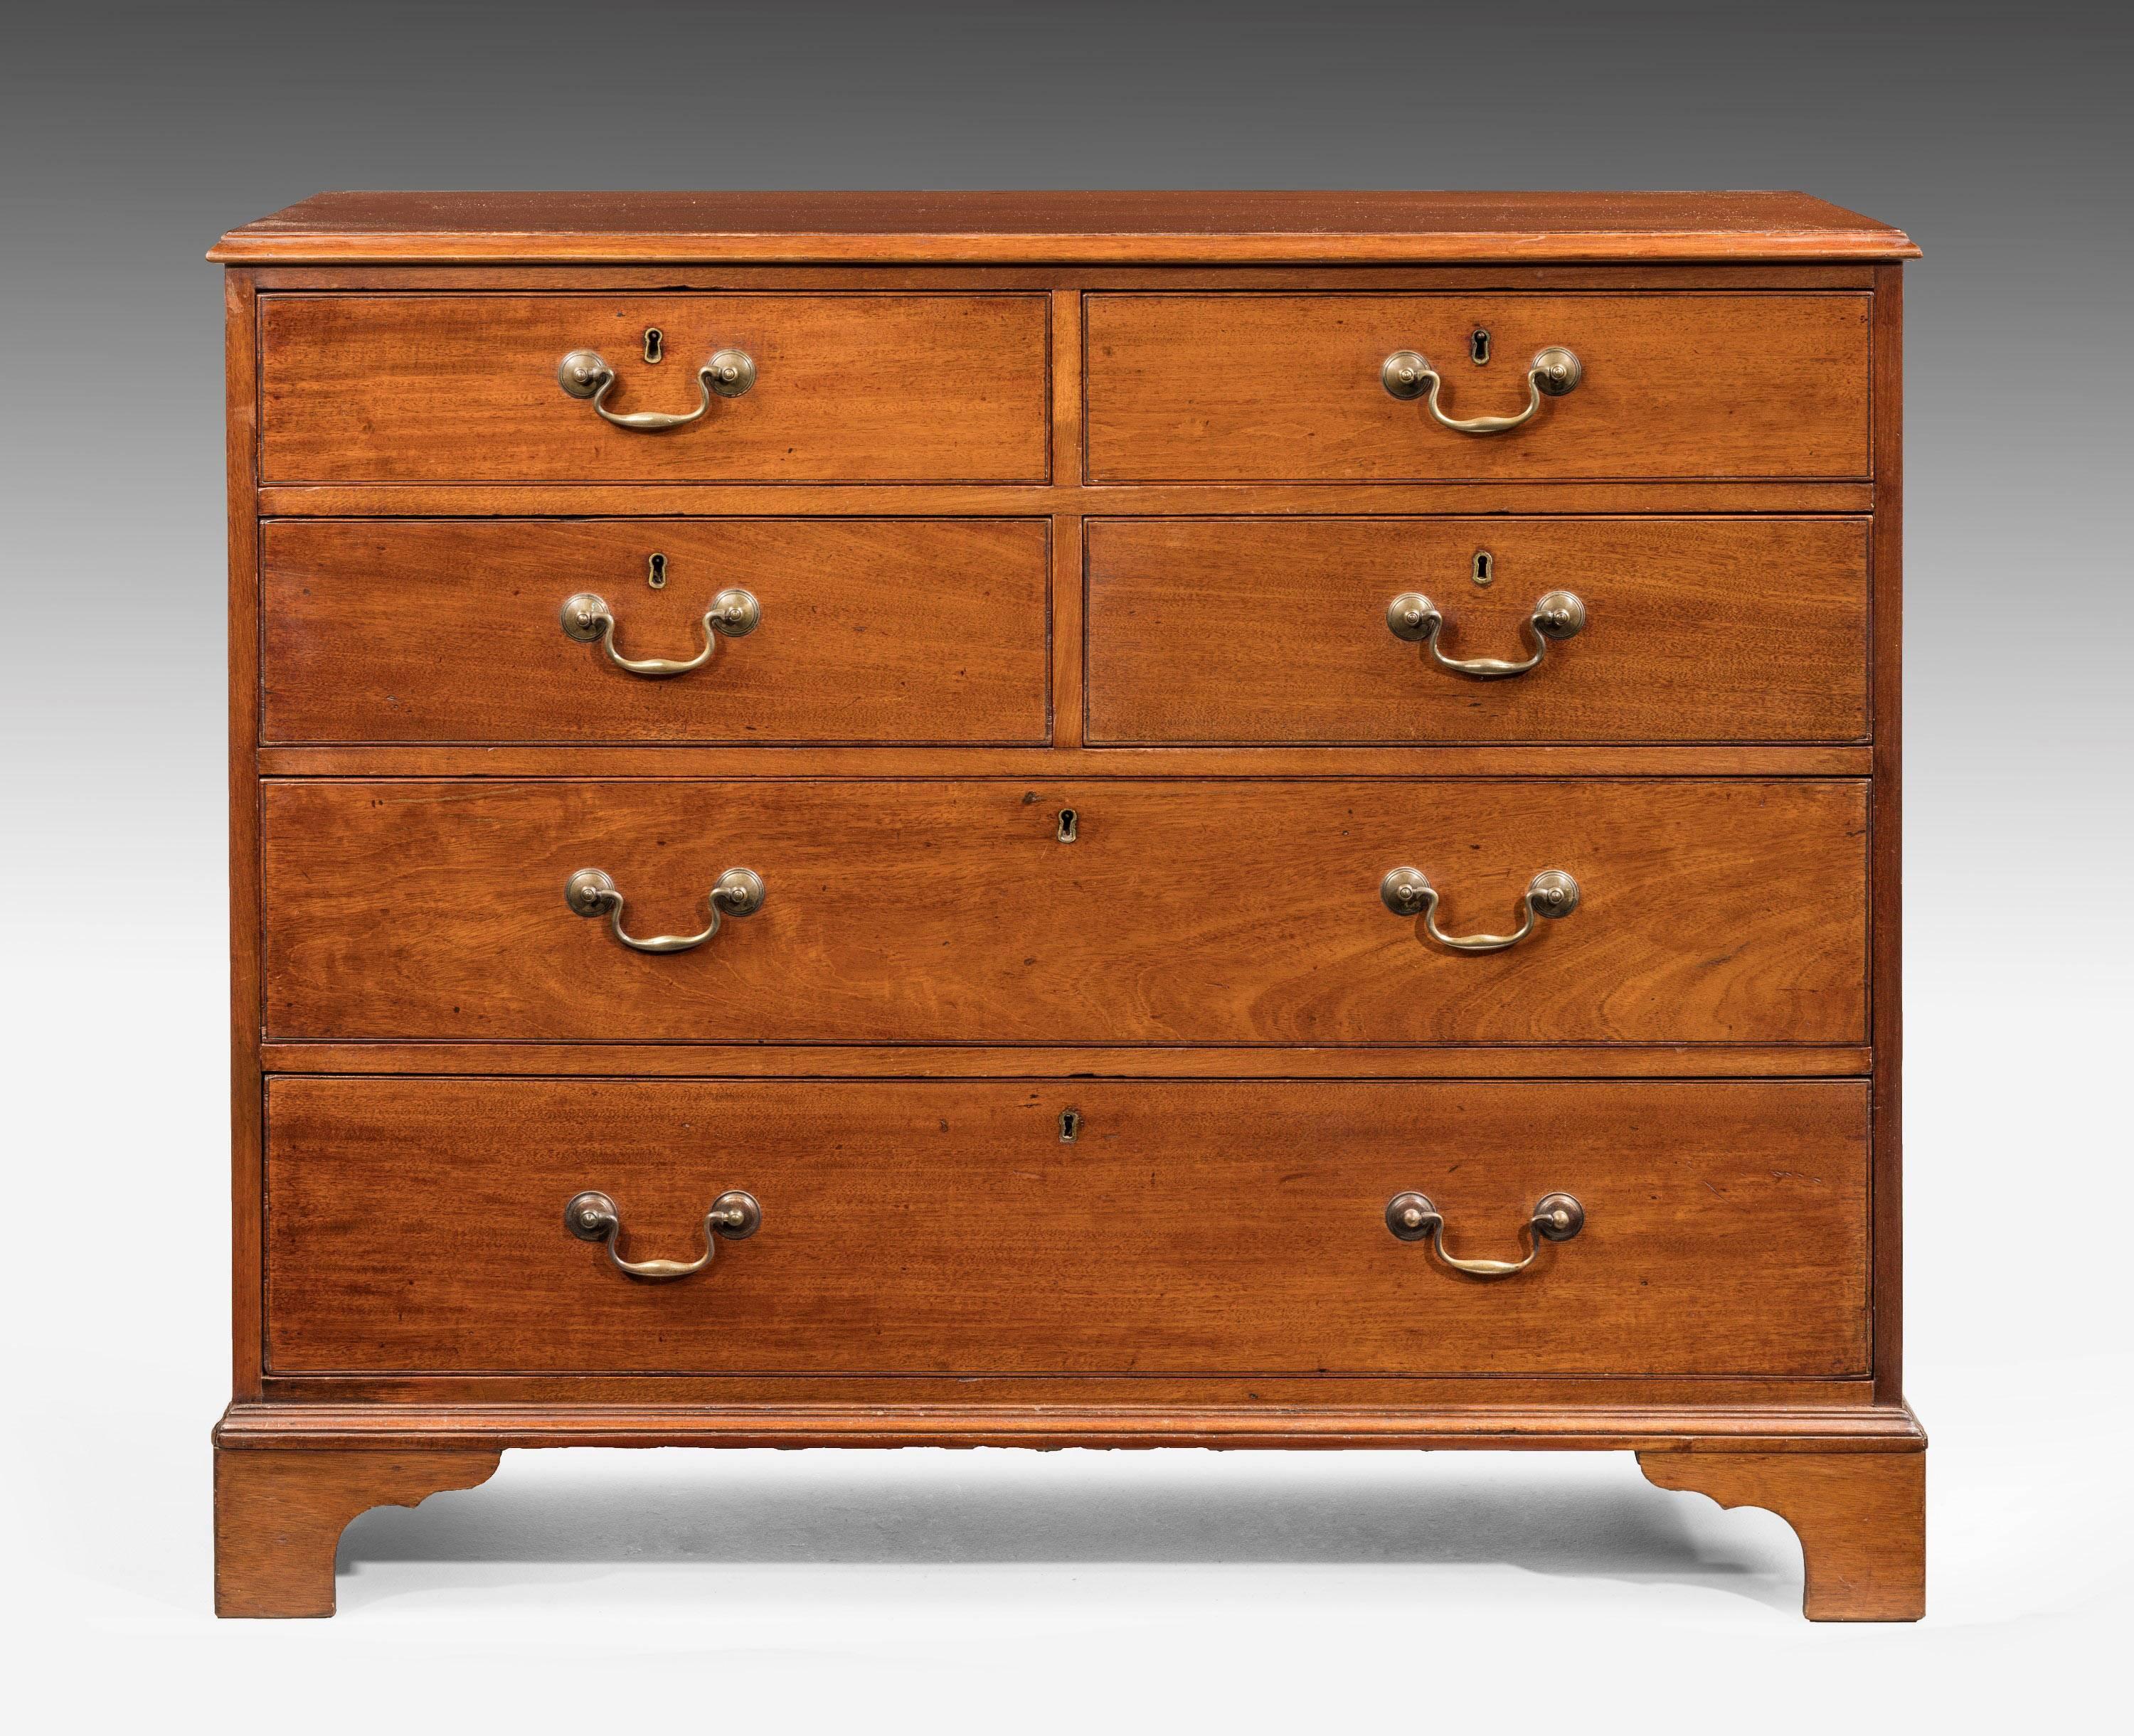 A George III mahogany chest of drawers. With fine and original cast neck handles. Retaining the original bracket feet.
             